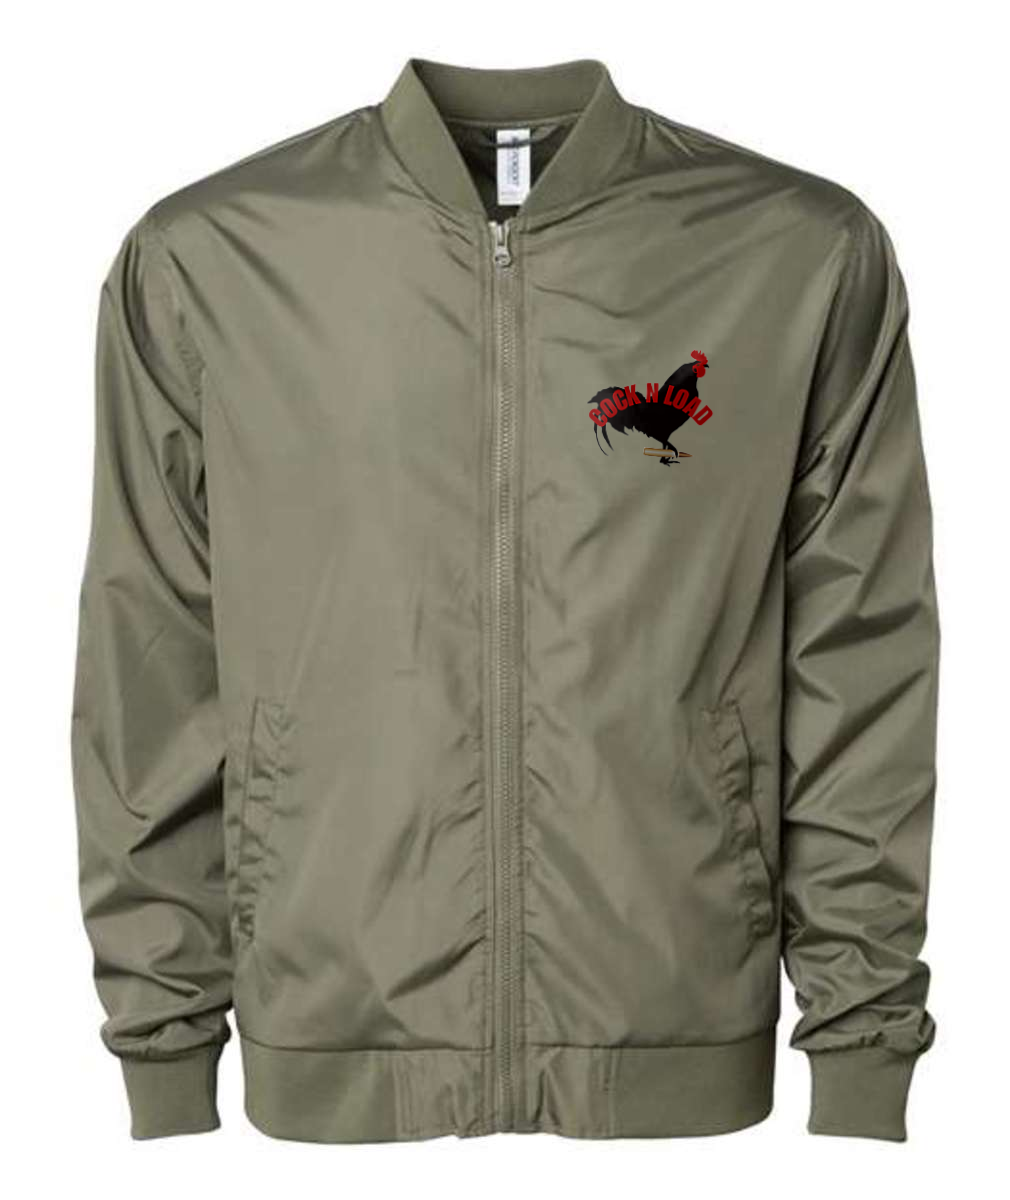 Cock n load 2 Embroidered Independent Trading Co. - Lightweight Bomber Jacket or Similar